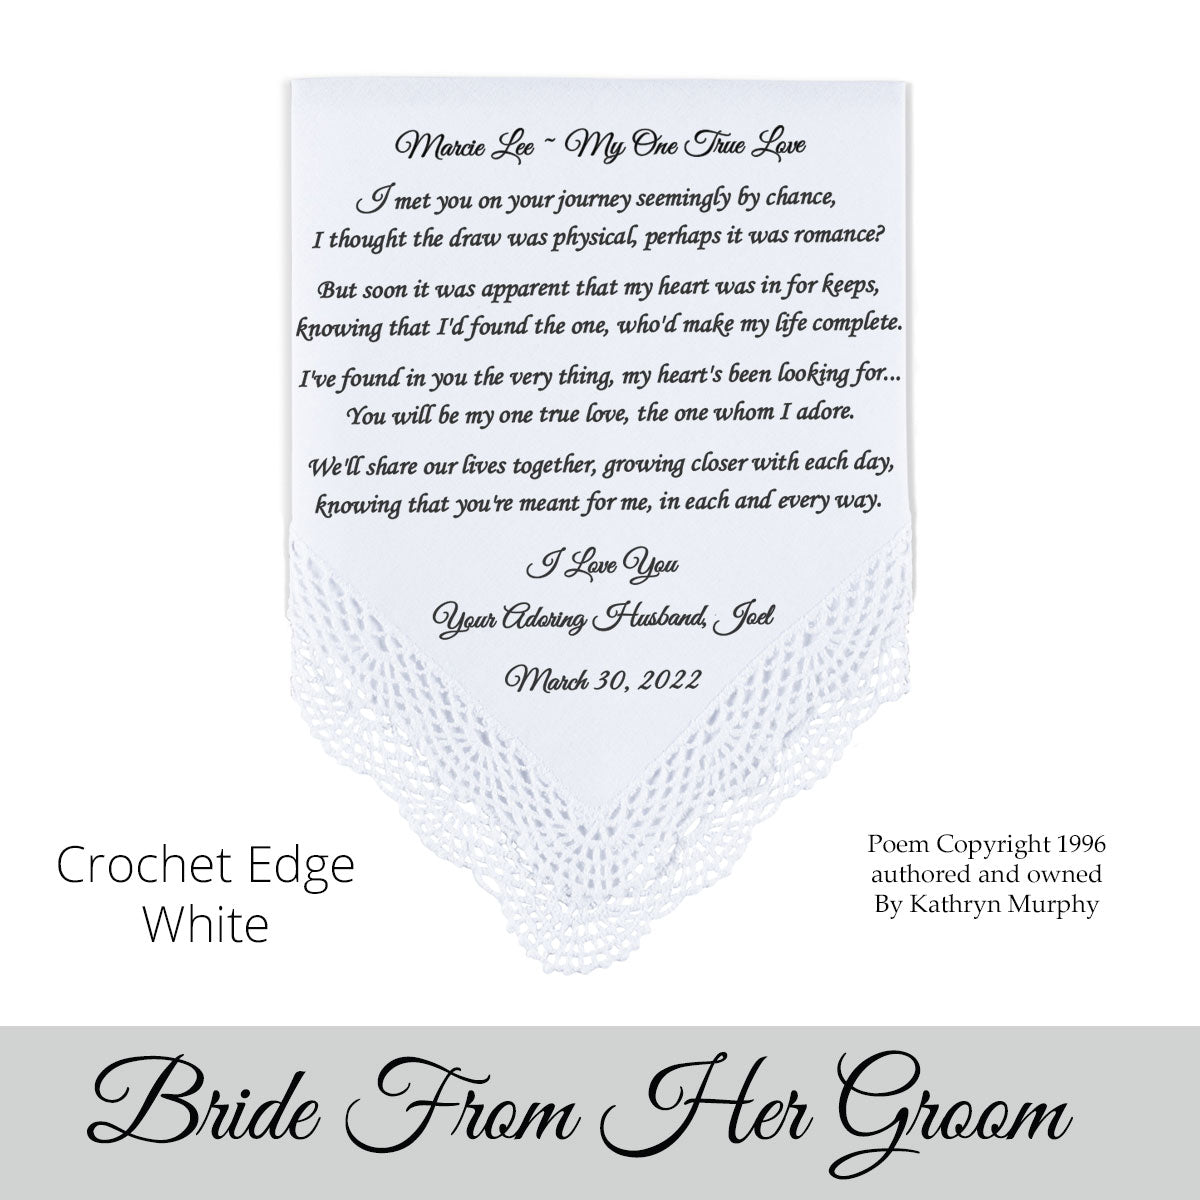 Gift for the Bride wedding hankie with the poem My One True Love